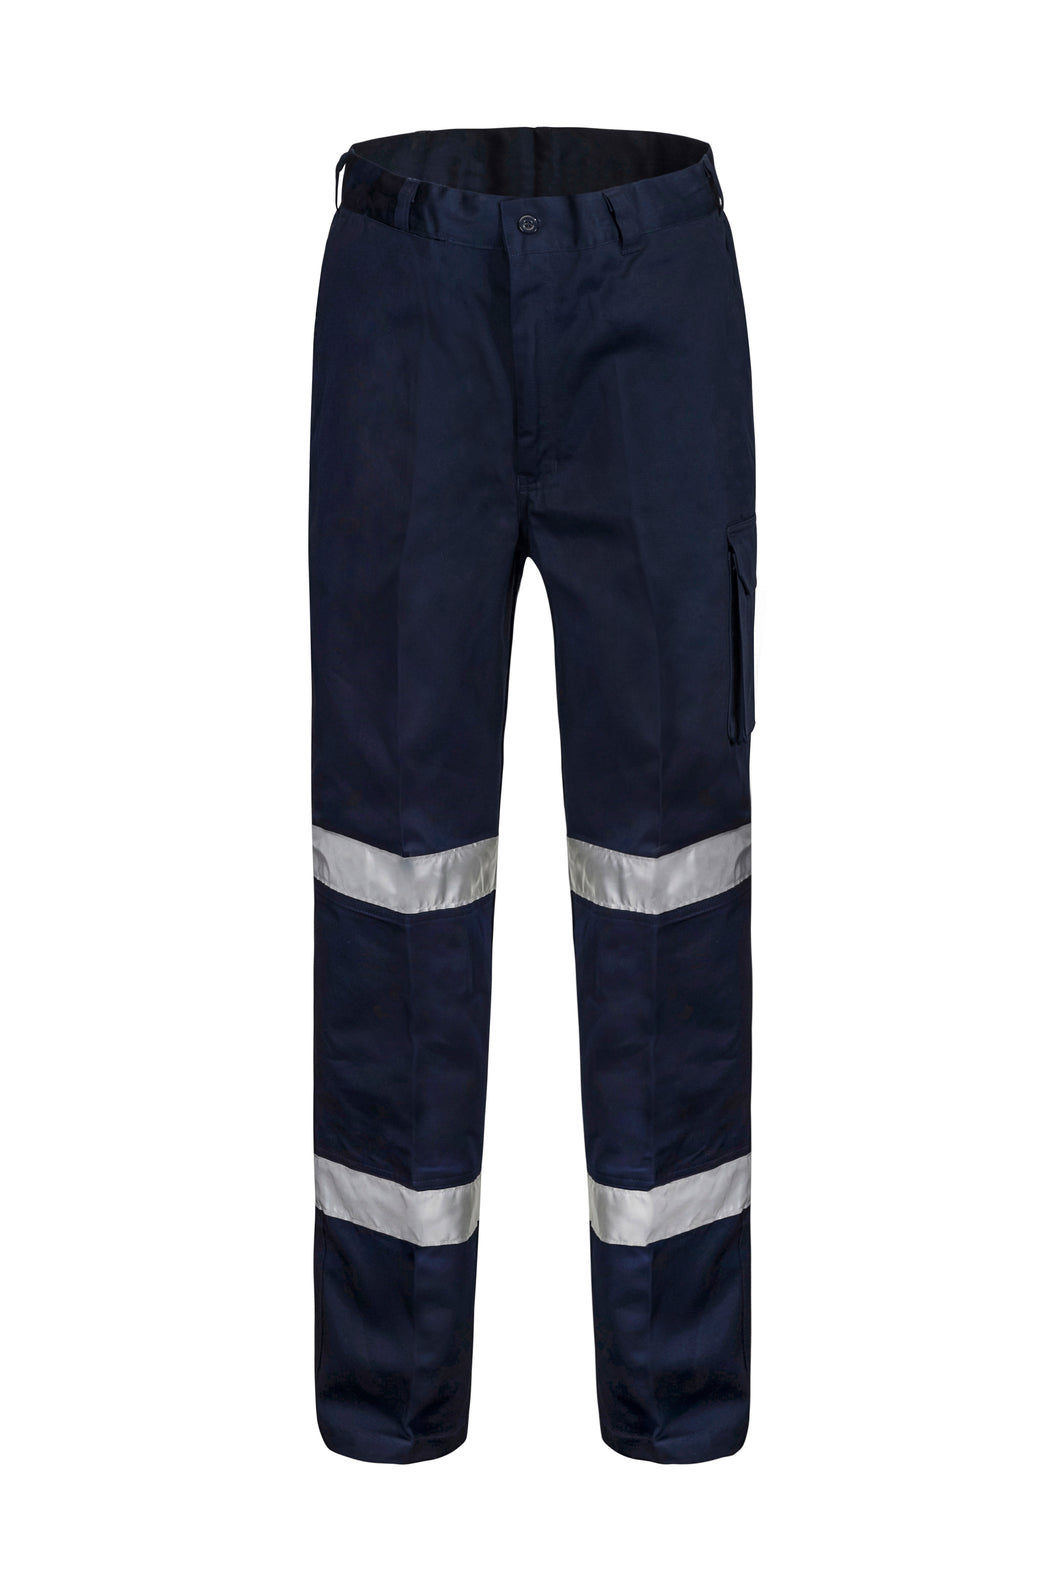 Modern Fit Mid-Weight Cargo Cotton Drill Trouser with CSR Reflective Tape